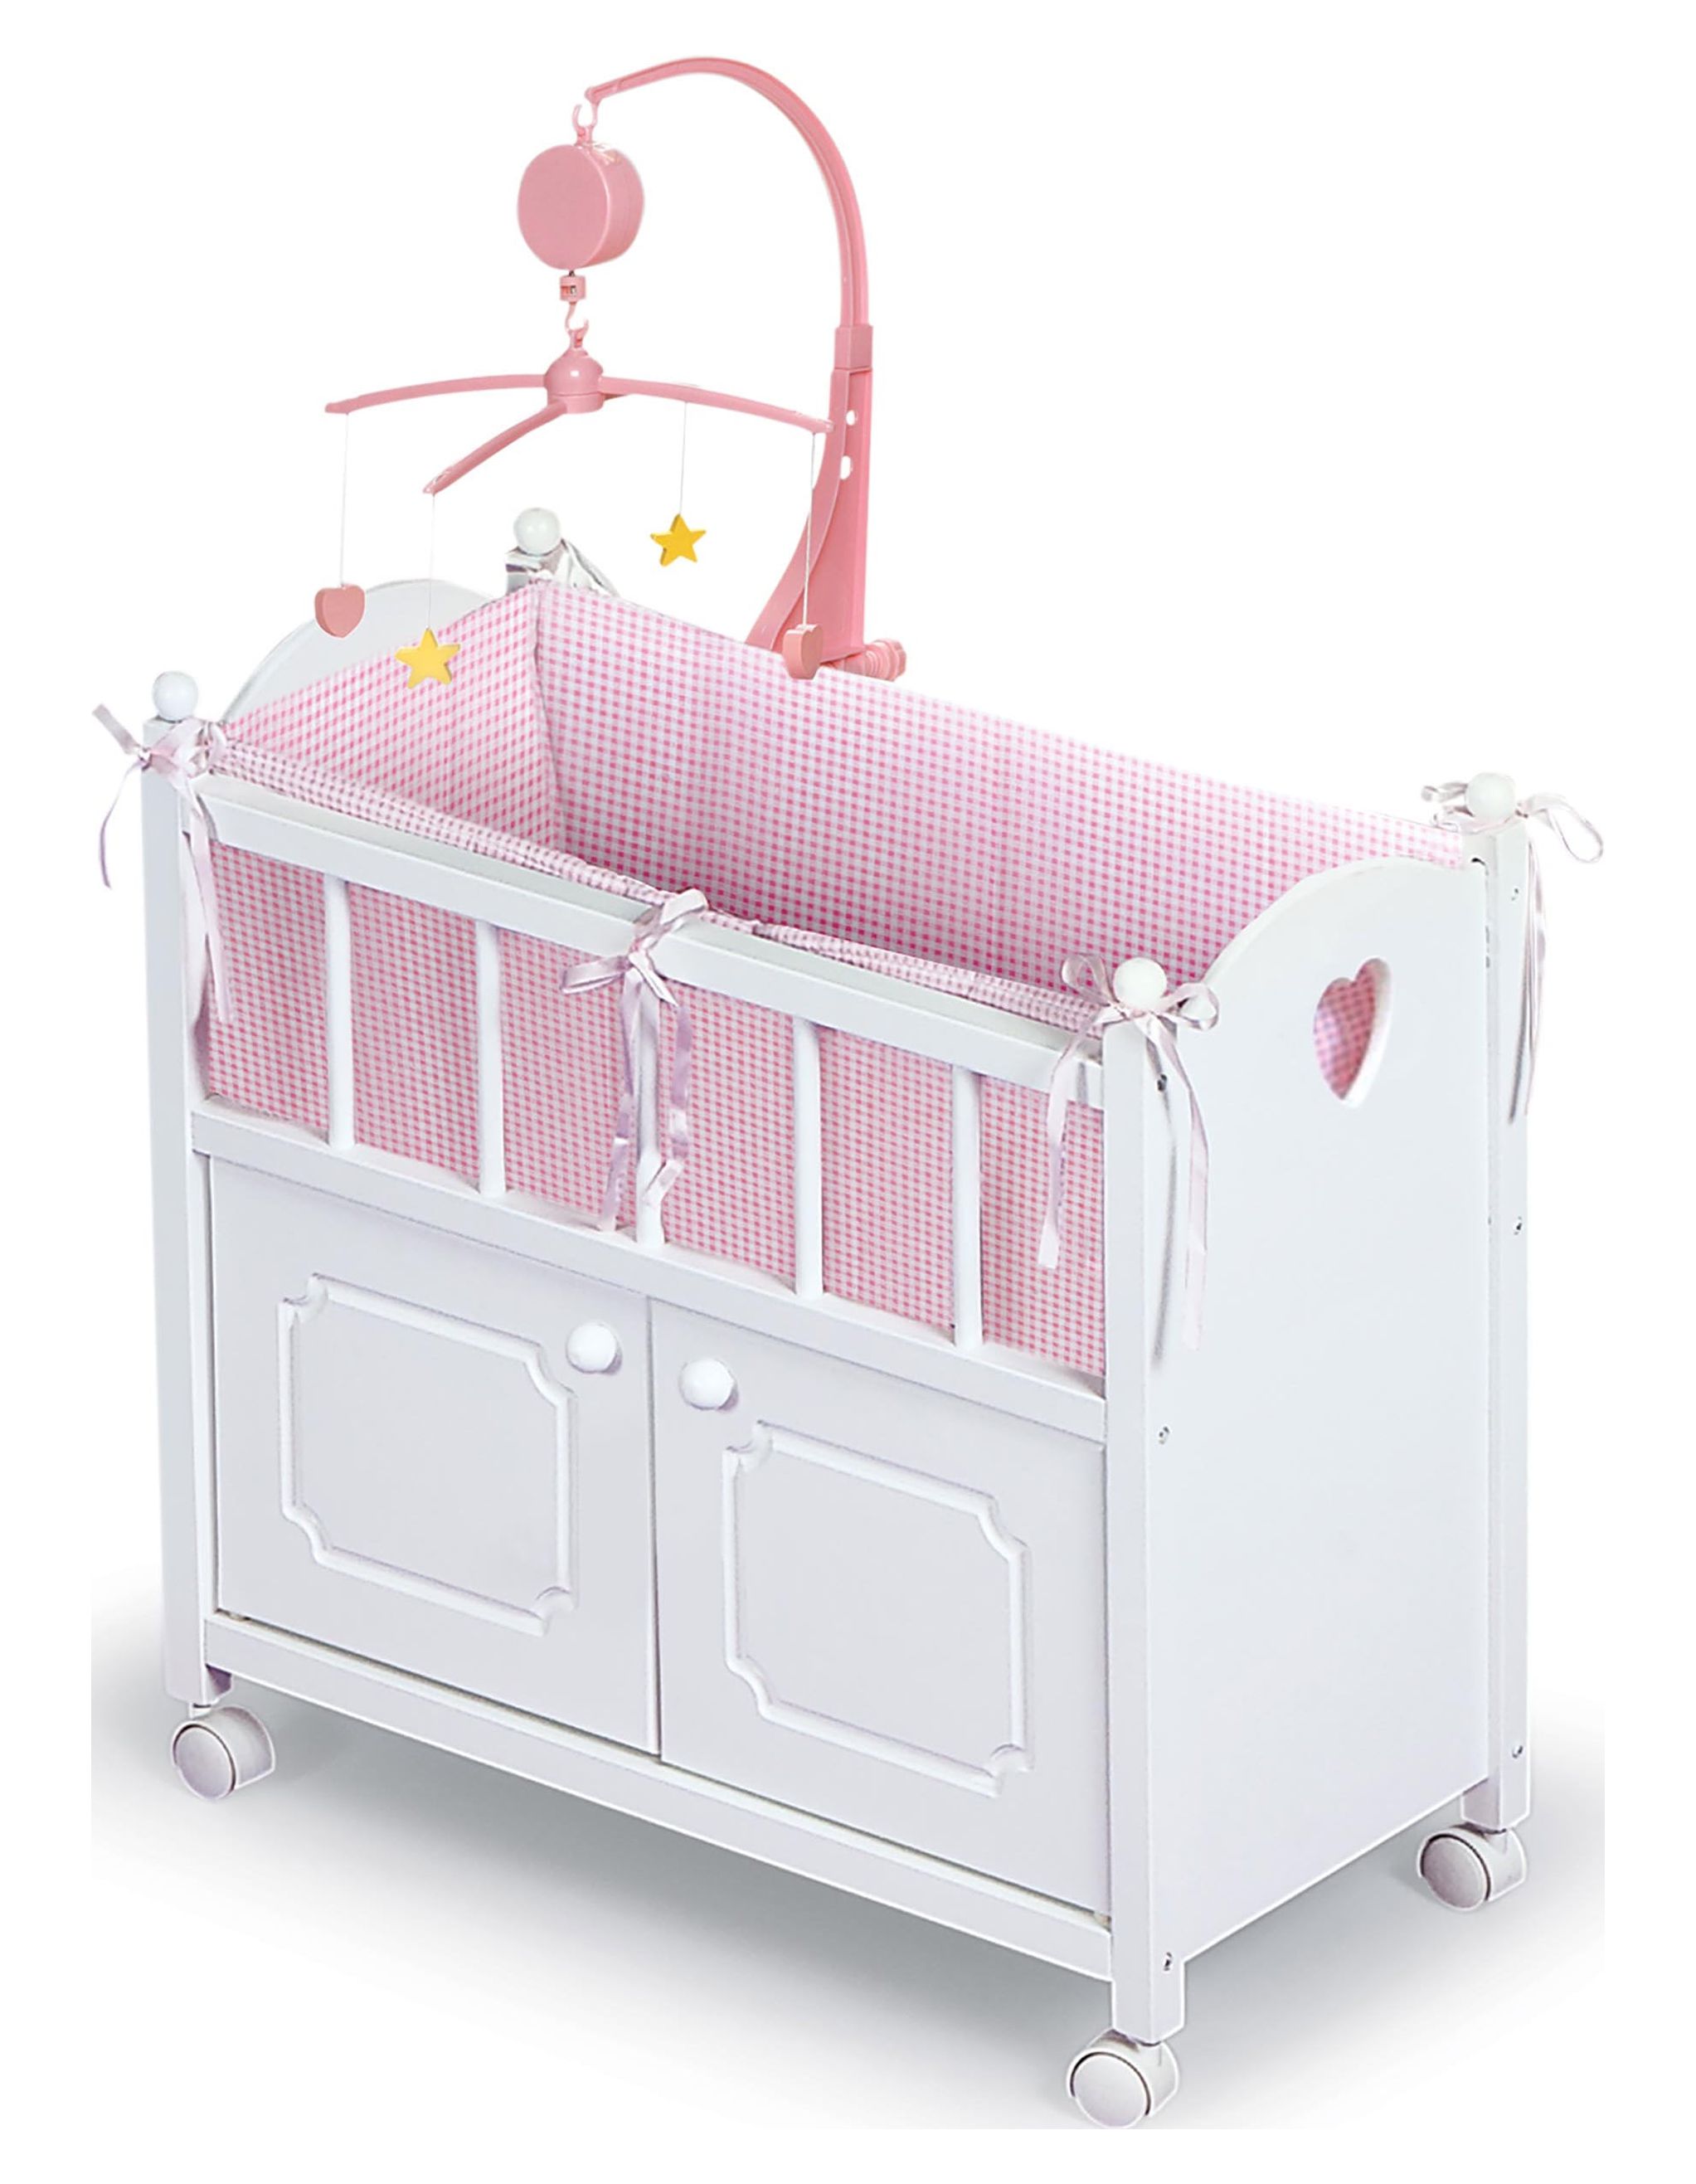 Badger Basket Cabinet Doll Crib with Gingham Bedding and Free Personalization Kit - White/Pink - image 1 of 13